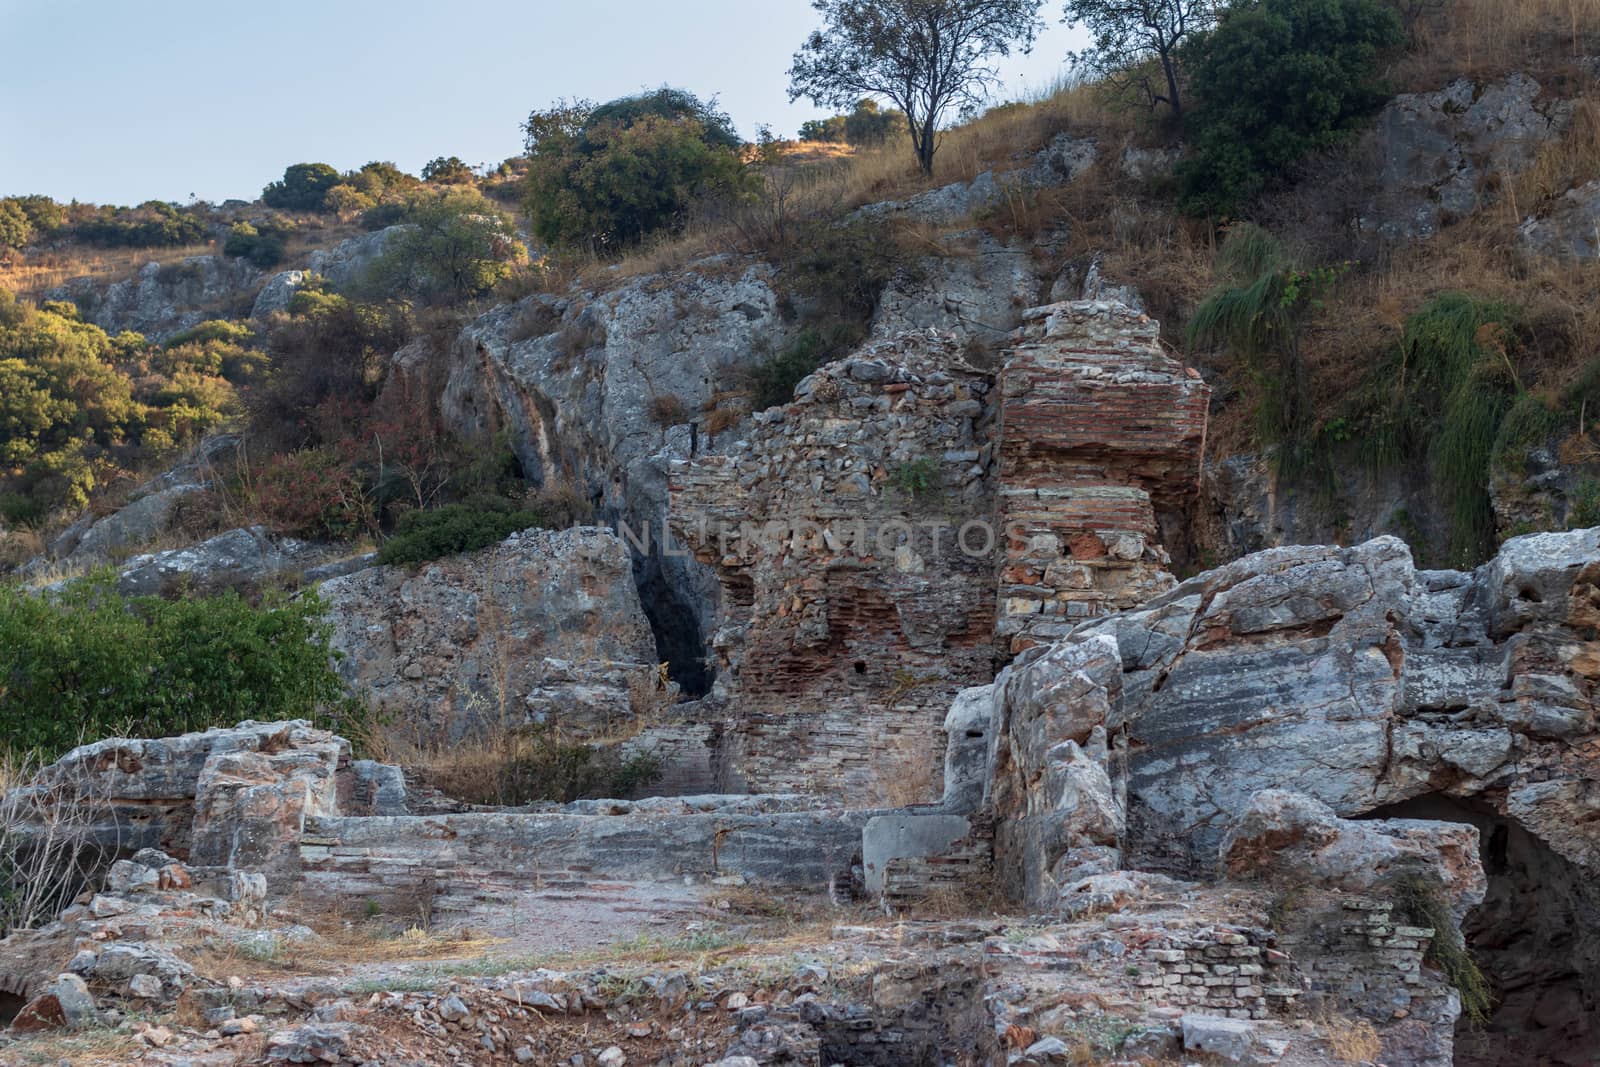 some ancient walls and stone structures at ancient city efes. photo has taken at izmir/turkey.